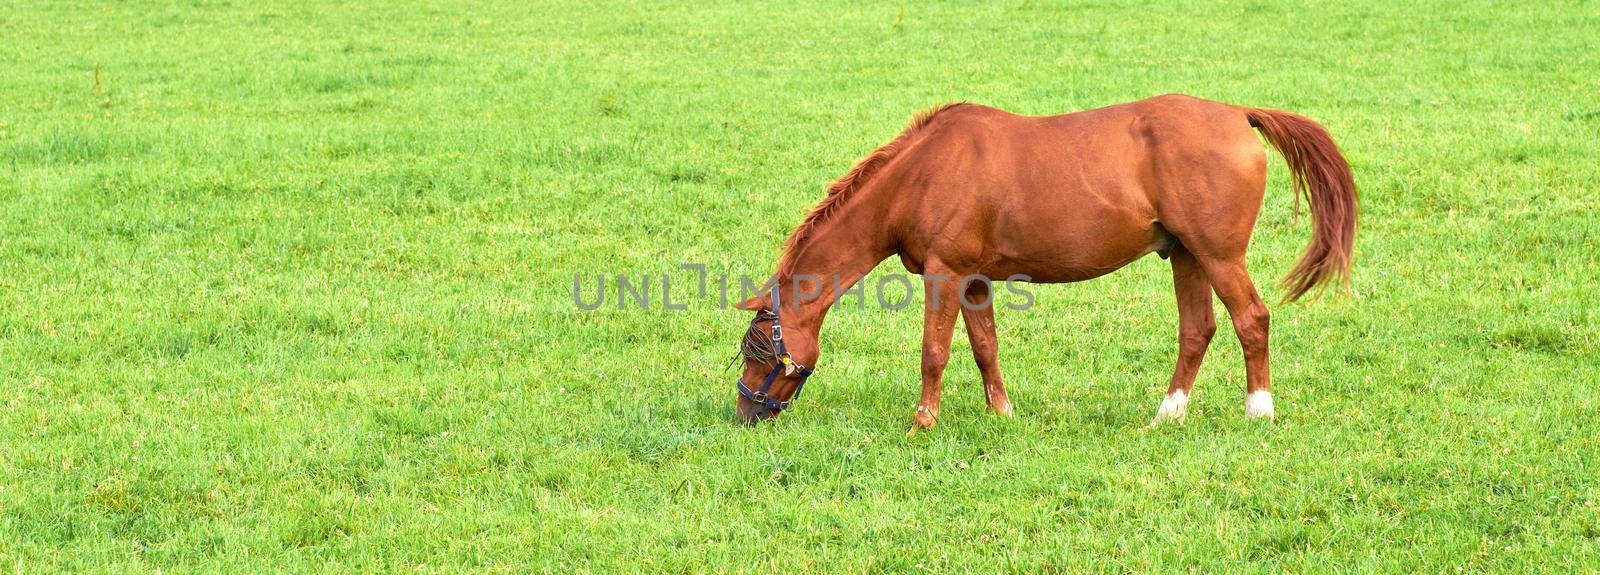 Brown baby horse eating grass from a lush green meadow with copyspace on a sunny day. Hungry purebred chestnut foal or pony grazing freely alone outdoors. Breeding livestock on a rural farm or ranch.